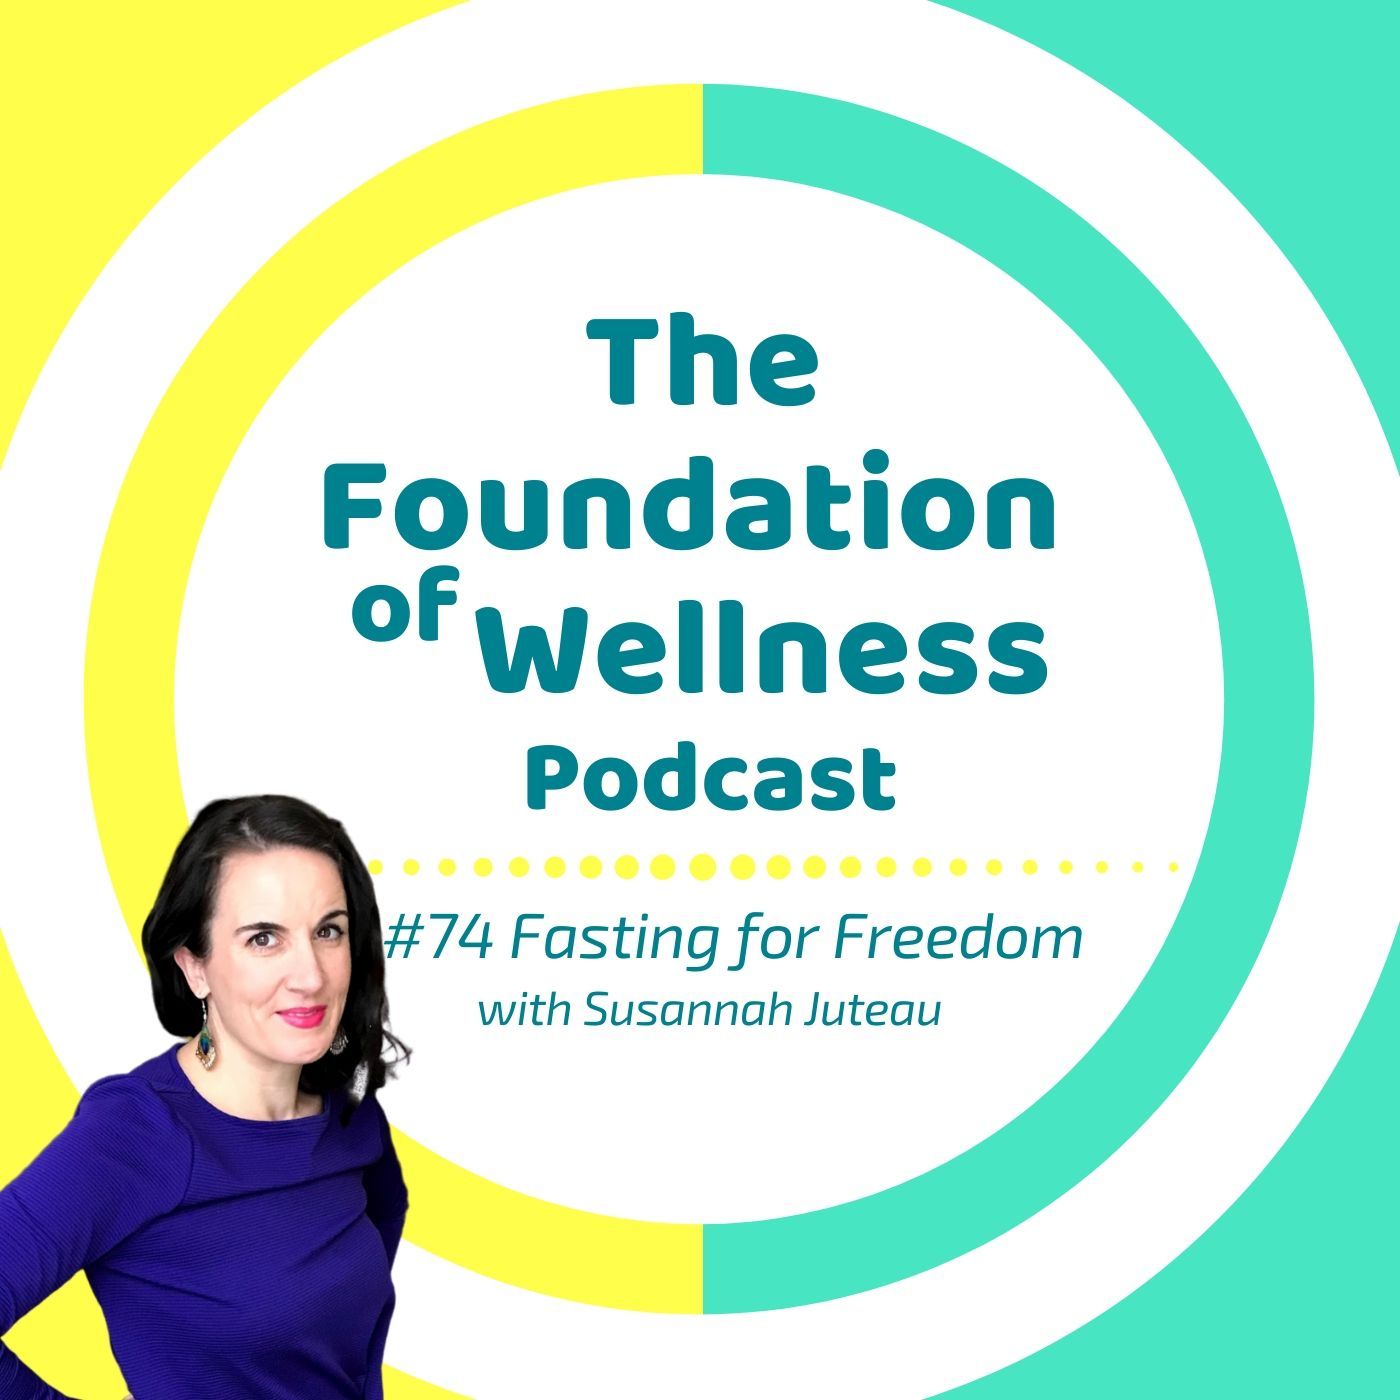 #74: Fasting for Freedom, Susannah Juteau's Headache and Brain Tumor Recovery